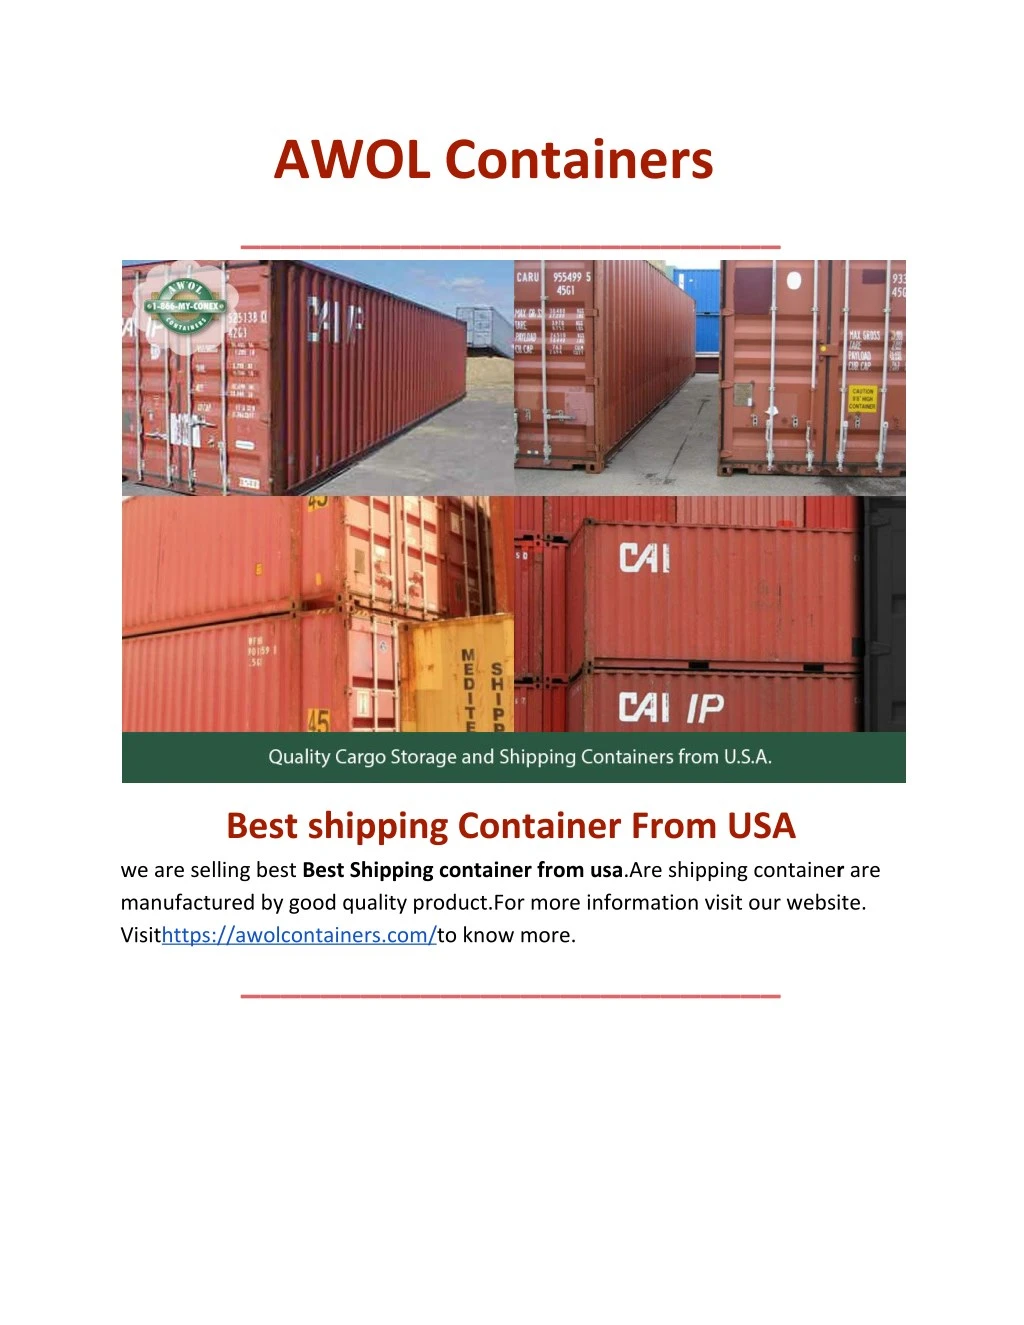 awol containers